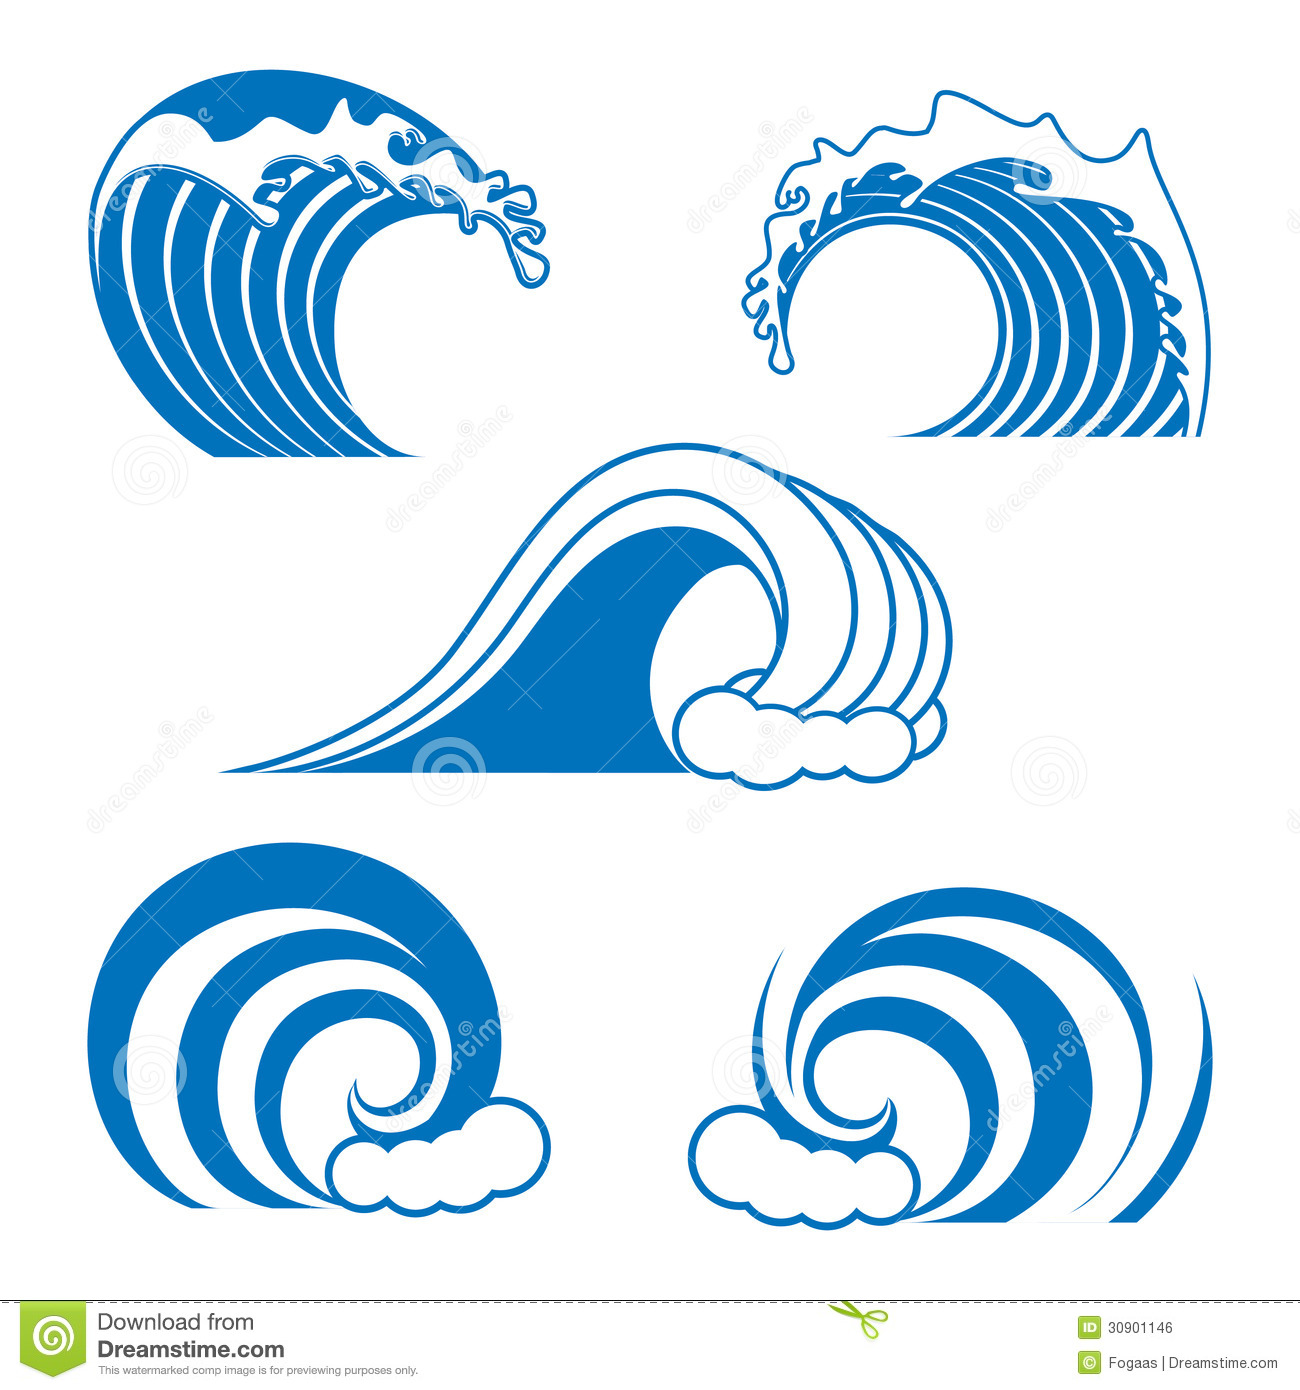 Ocean Wave Contour Set In Blue Color Isolated On The White Background